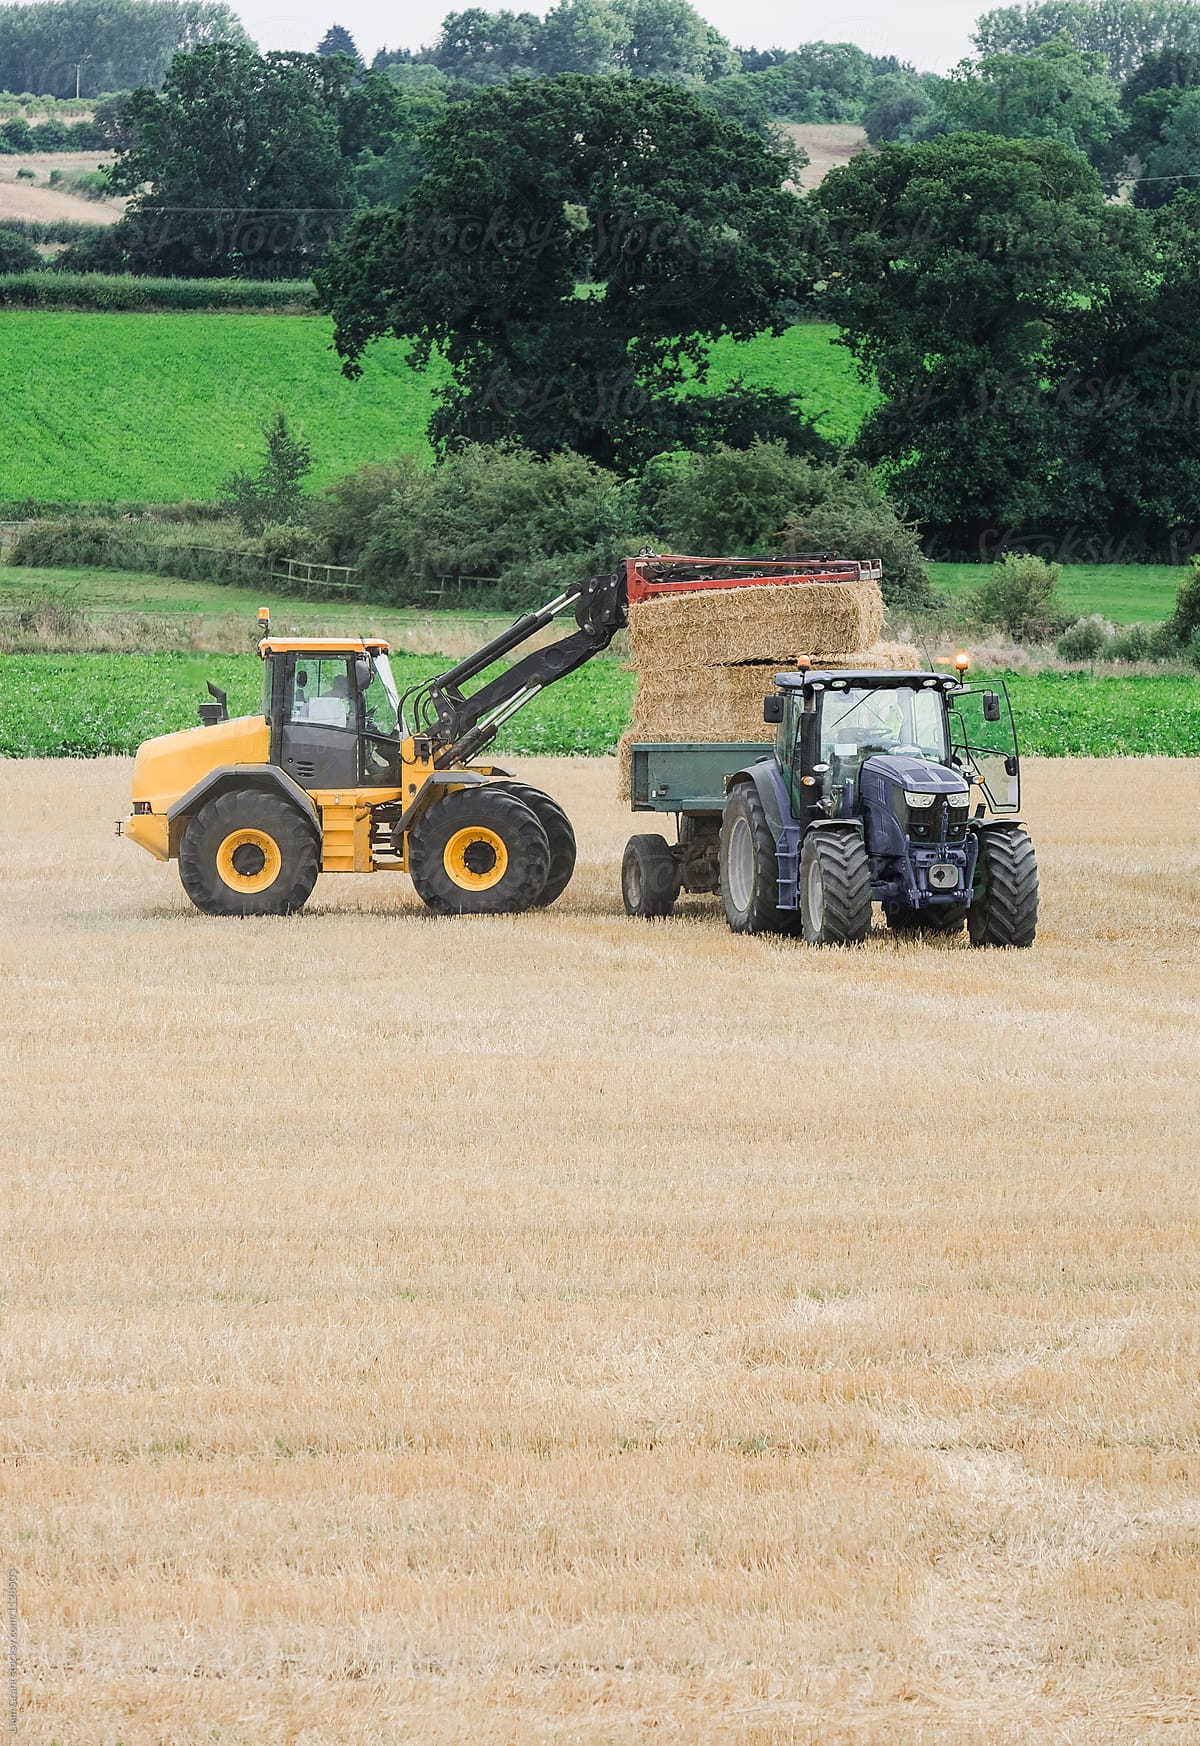 Wheel loader collecting straw bales and loading them onto a trac